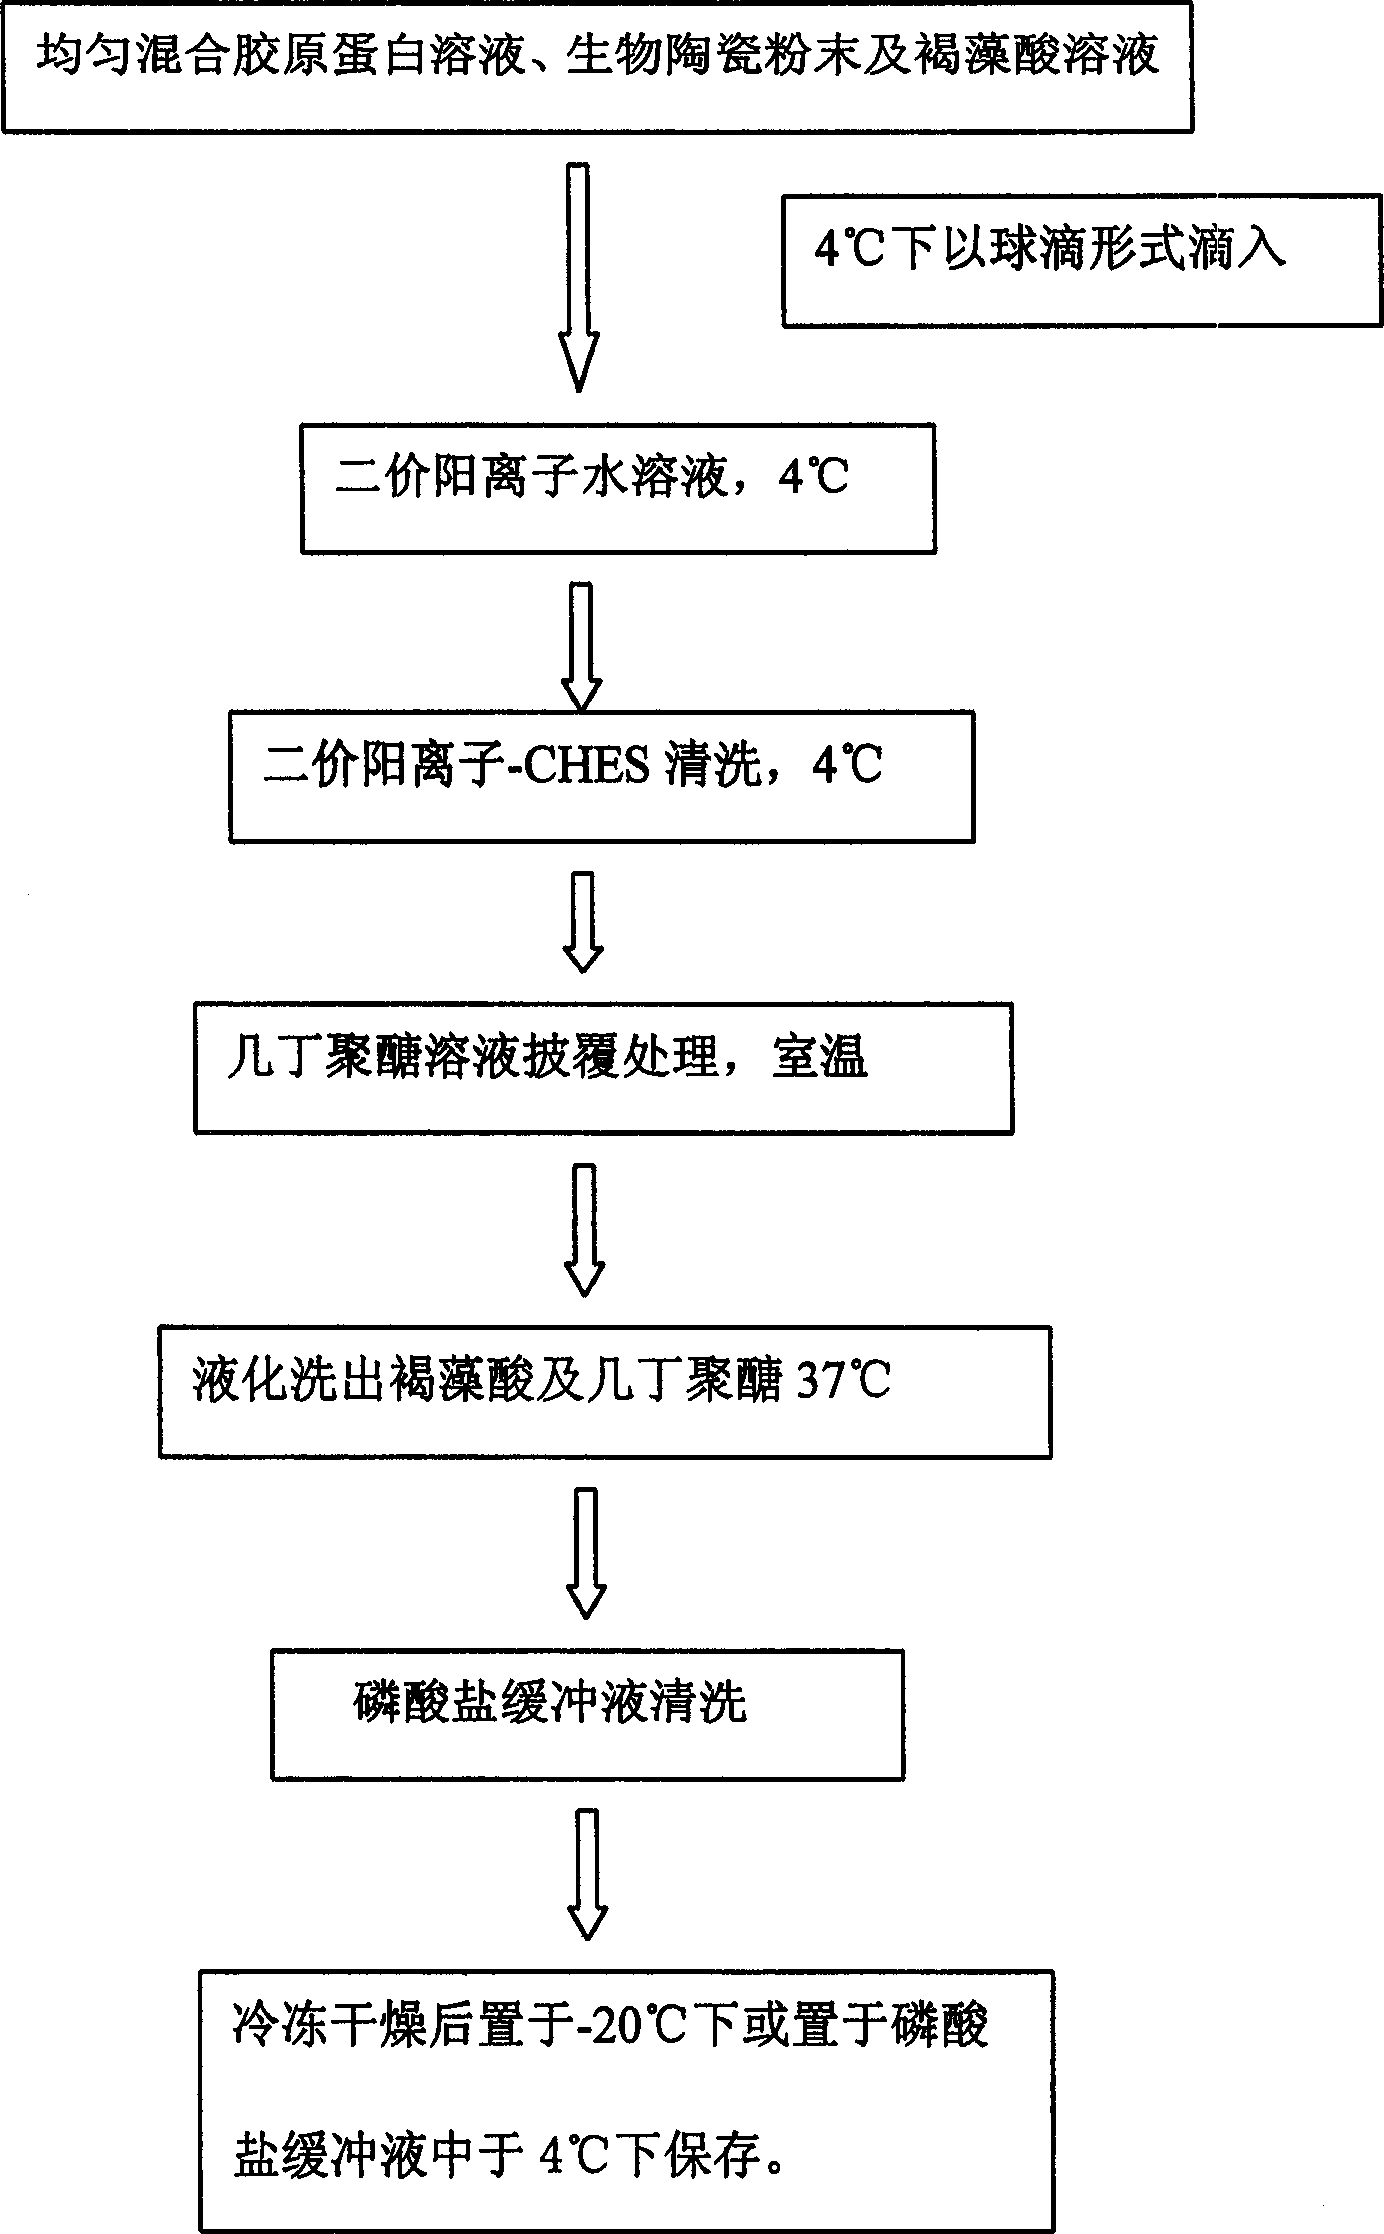 Method for preparing collagen and biological ceramic powder composite material microparticles